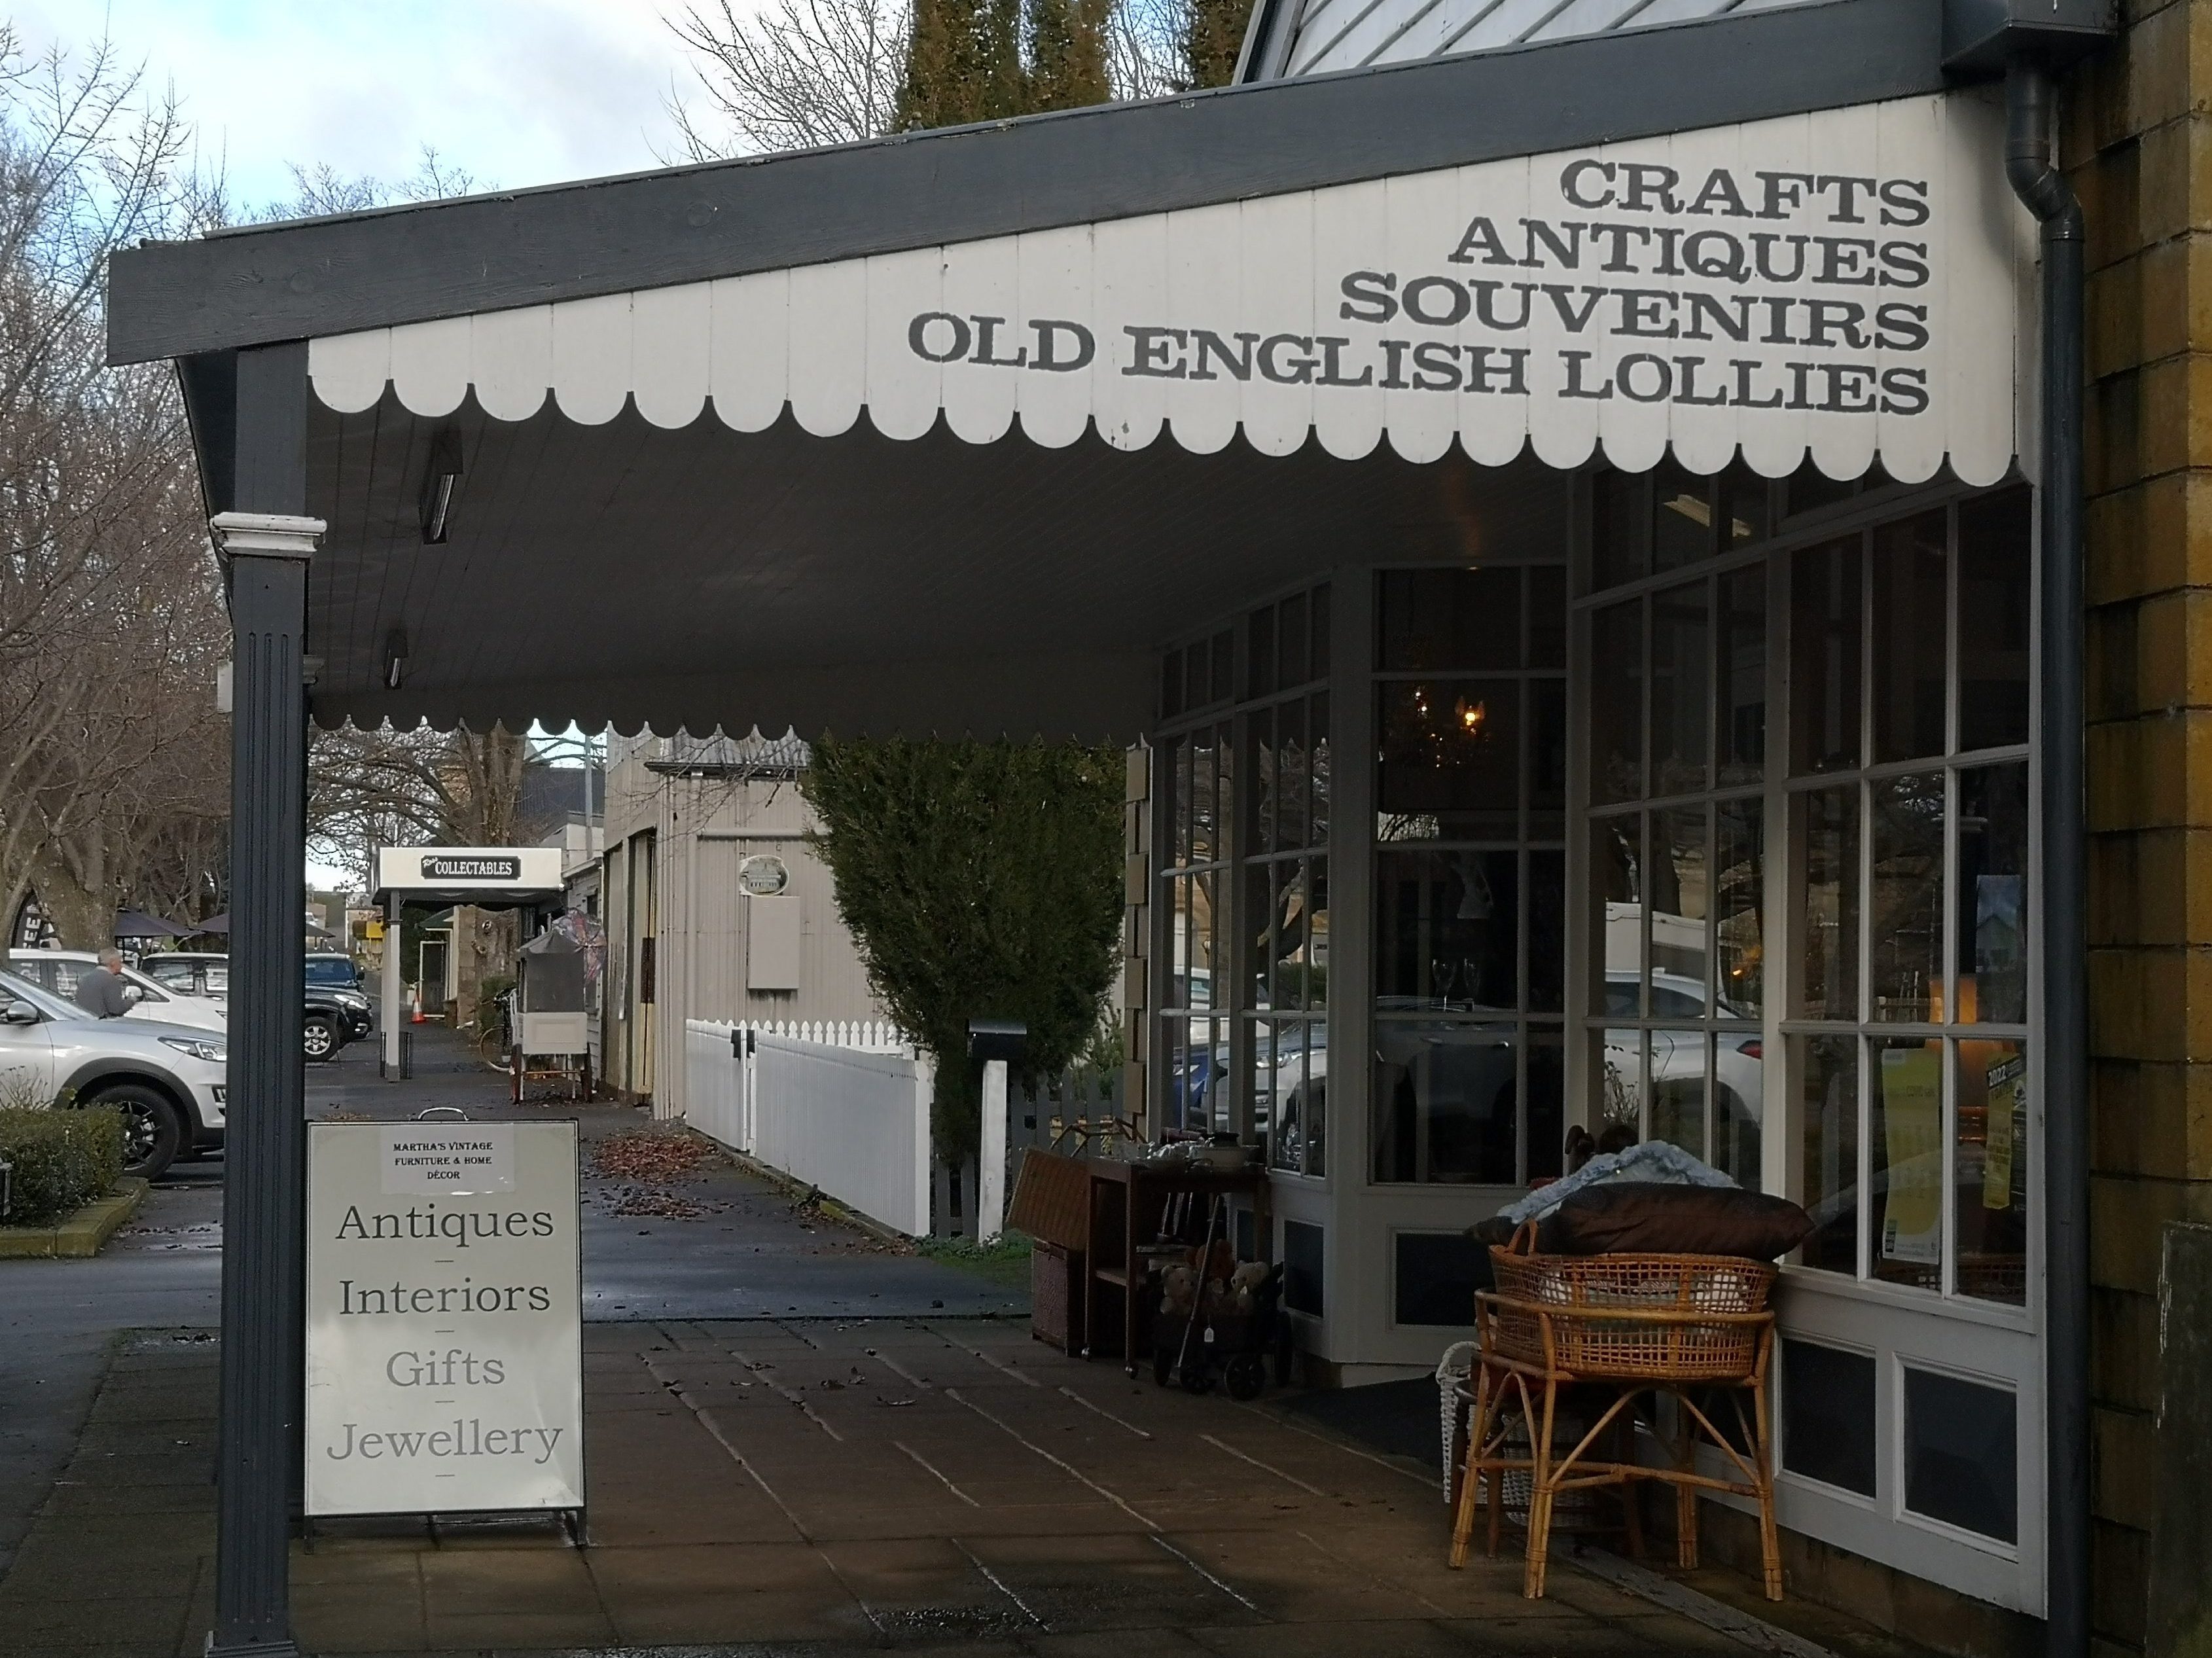 External view of verandah and wares at Marthas Vintage Clothes and Wares in Ross